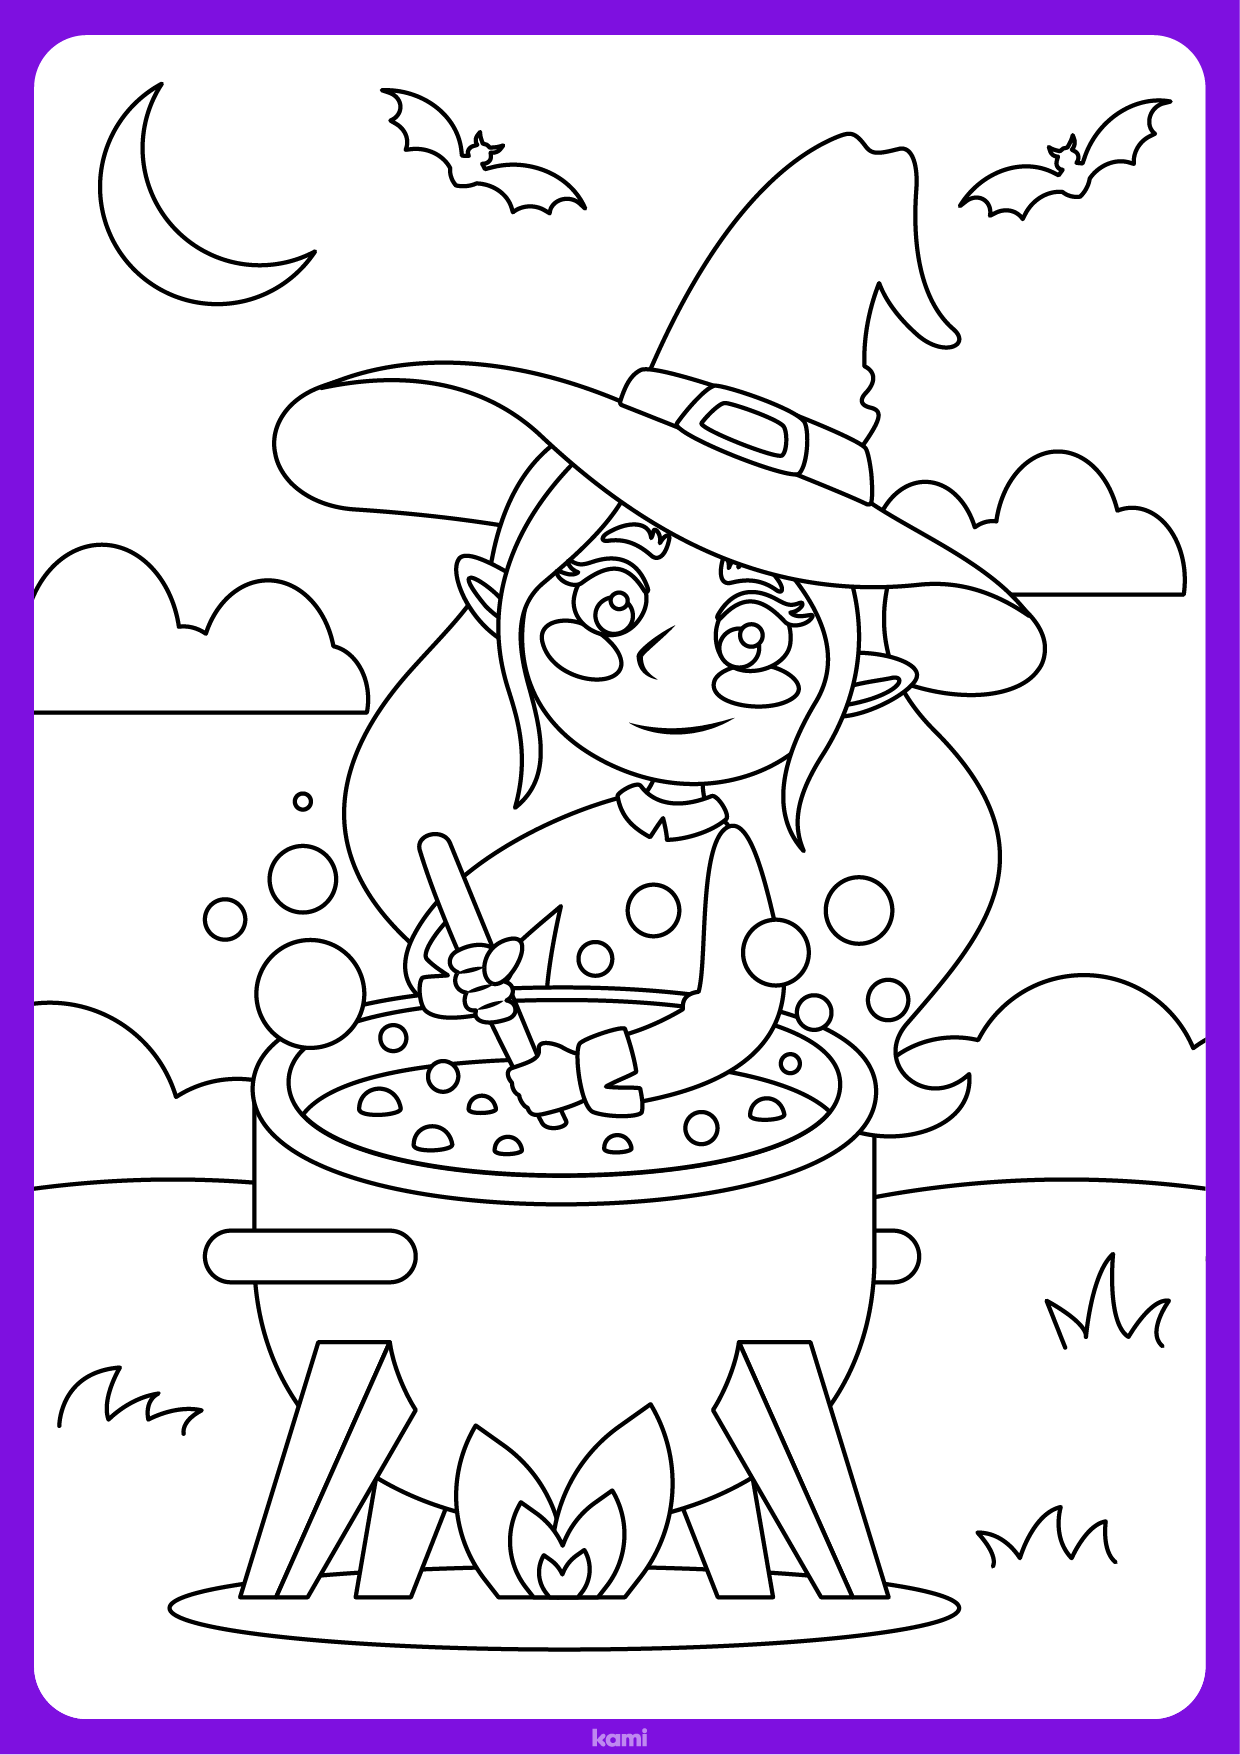 Halloween coloring sheet witch for teachers perfect for grades st nd rd th th k pre k other classroom resources kami library